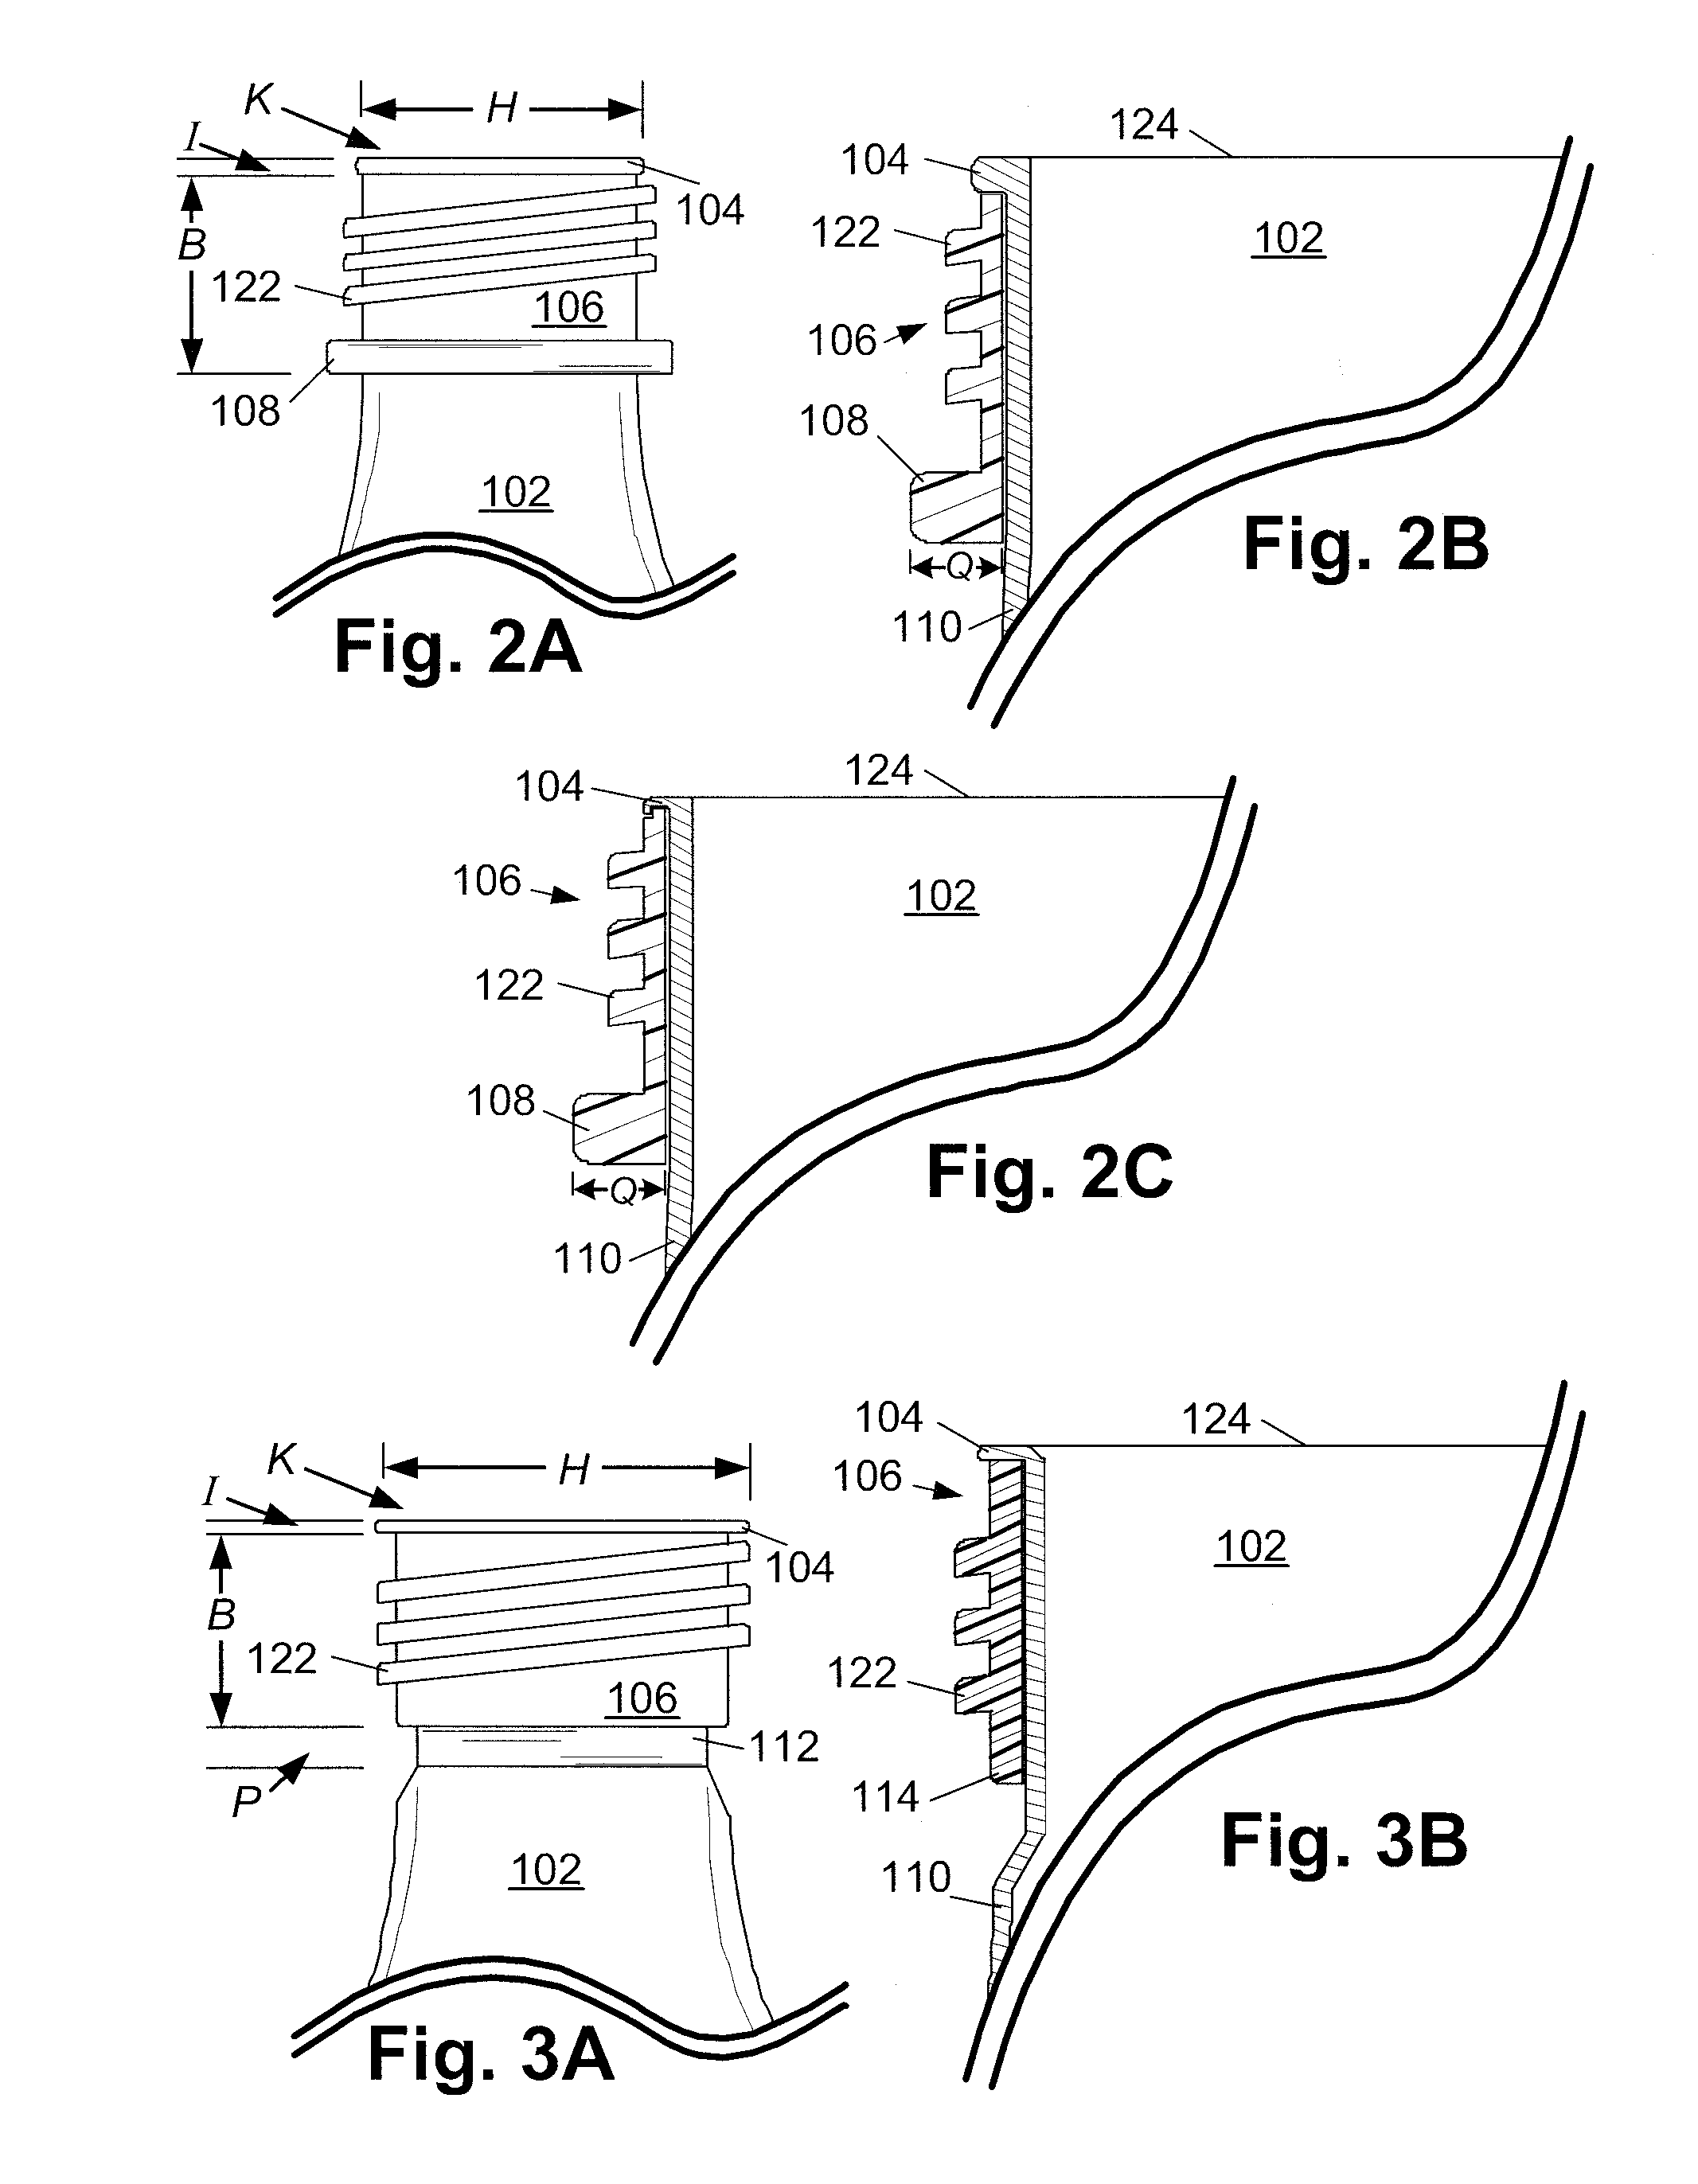 Method of isolating column loading and mitigating deformation of shaped metal vessels